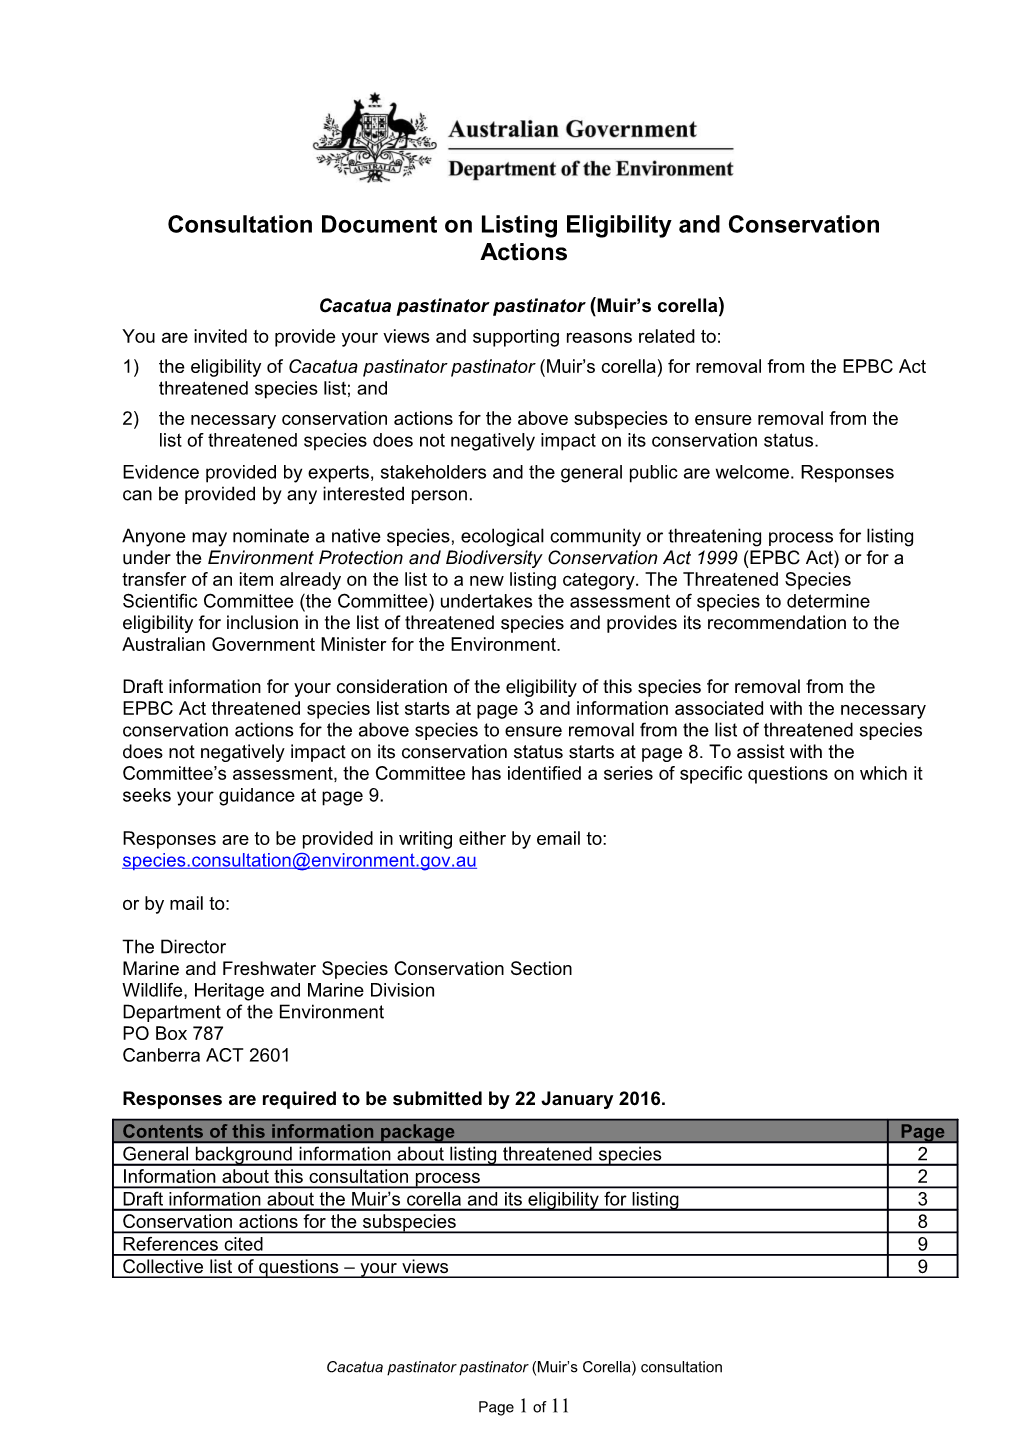 Consultation Document on Listing Eligibility and Conservation Actions - Cacatua Pastinator